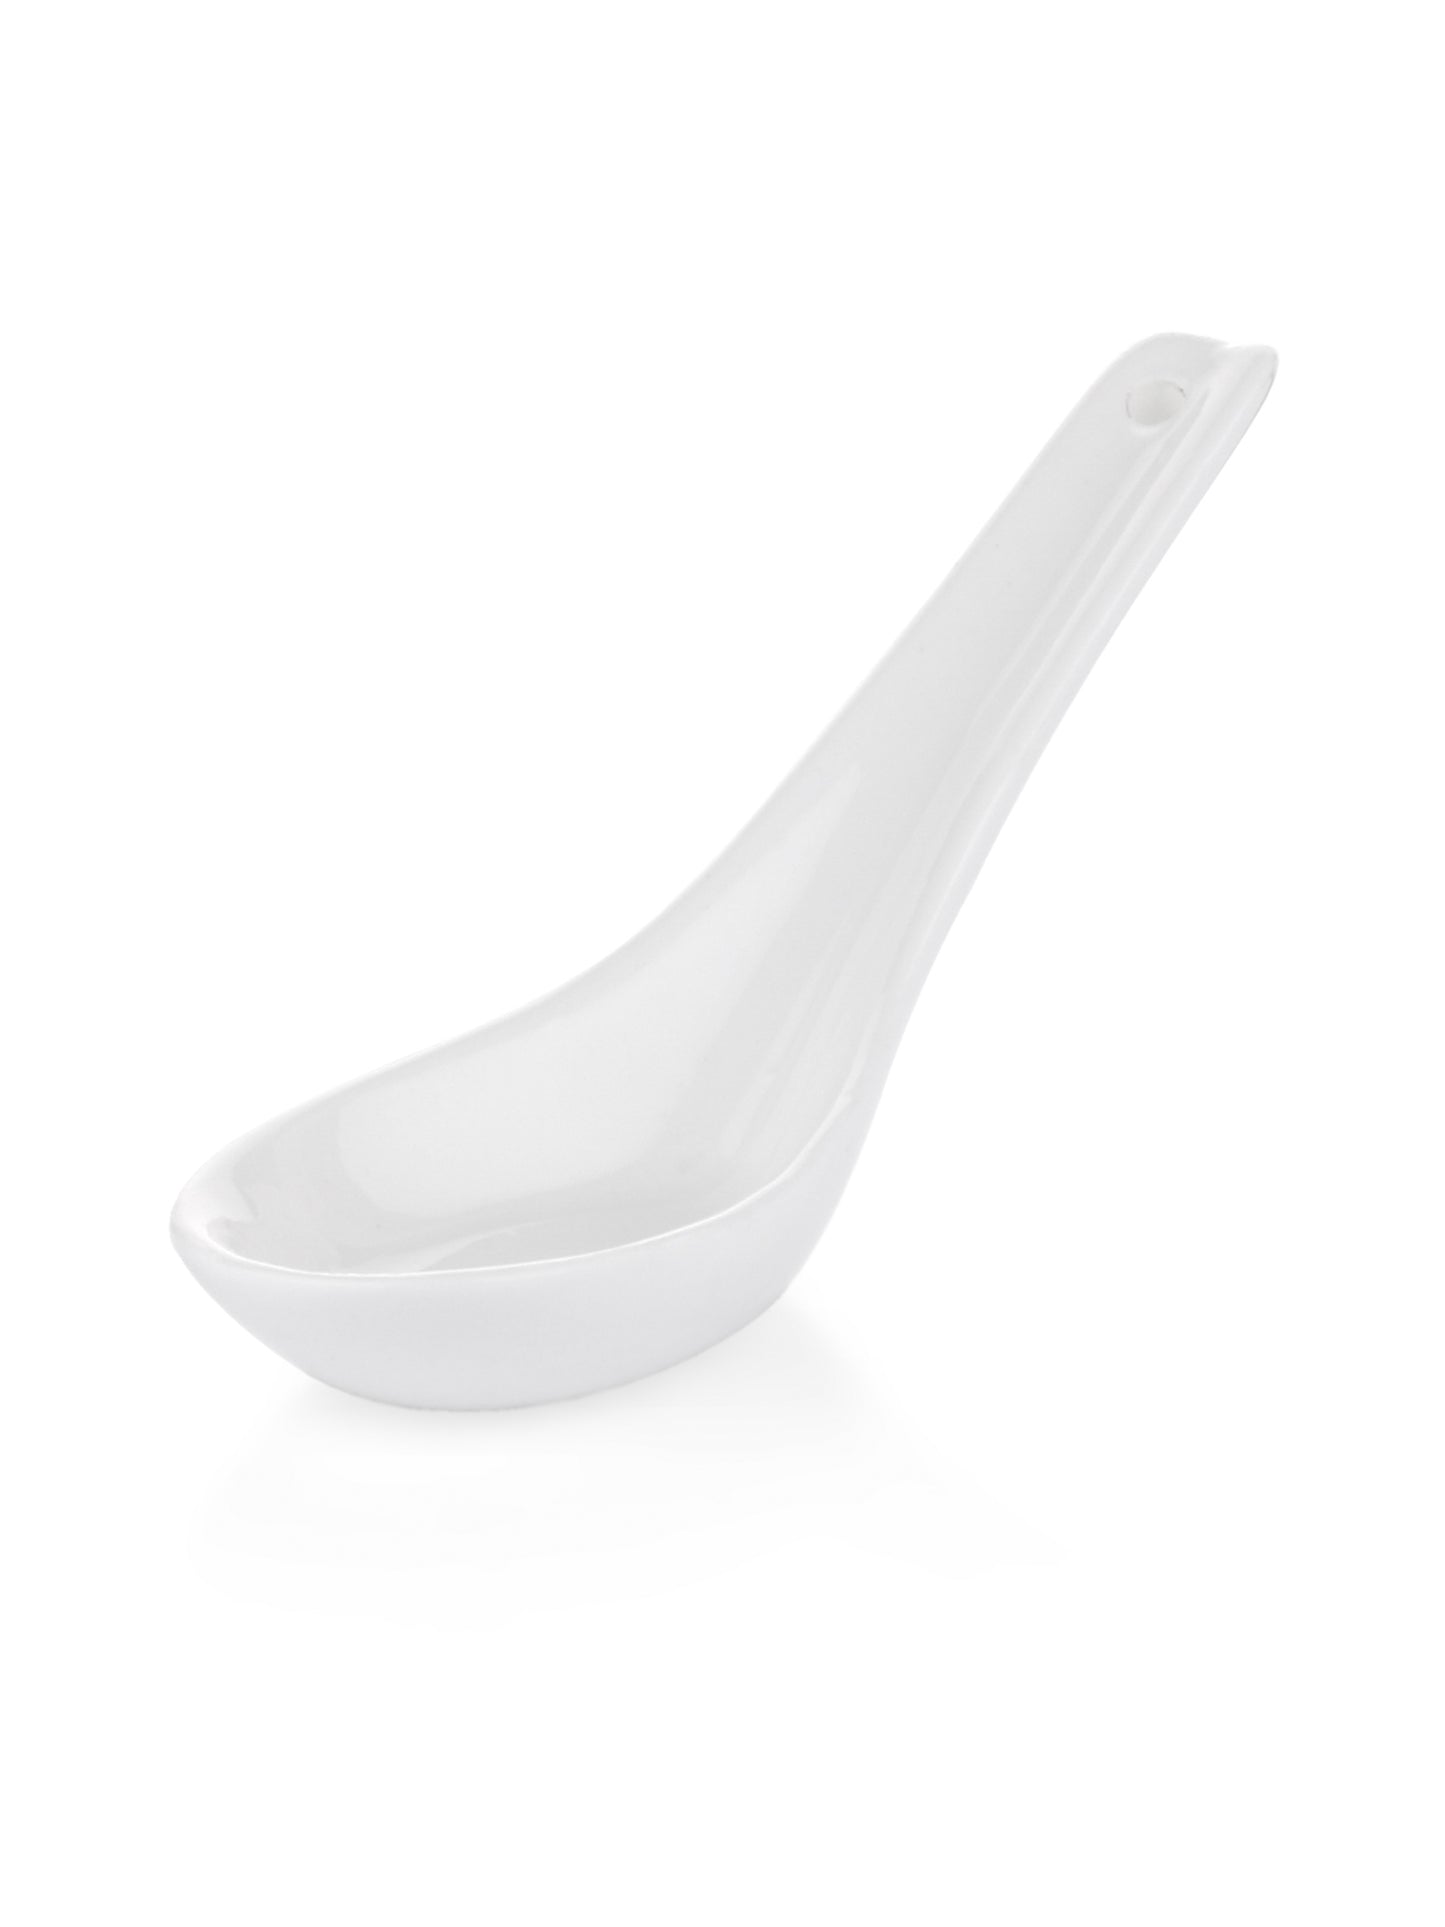 Clay Craft Basic Soup Spoon, Plain White, 4 pieces